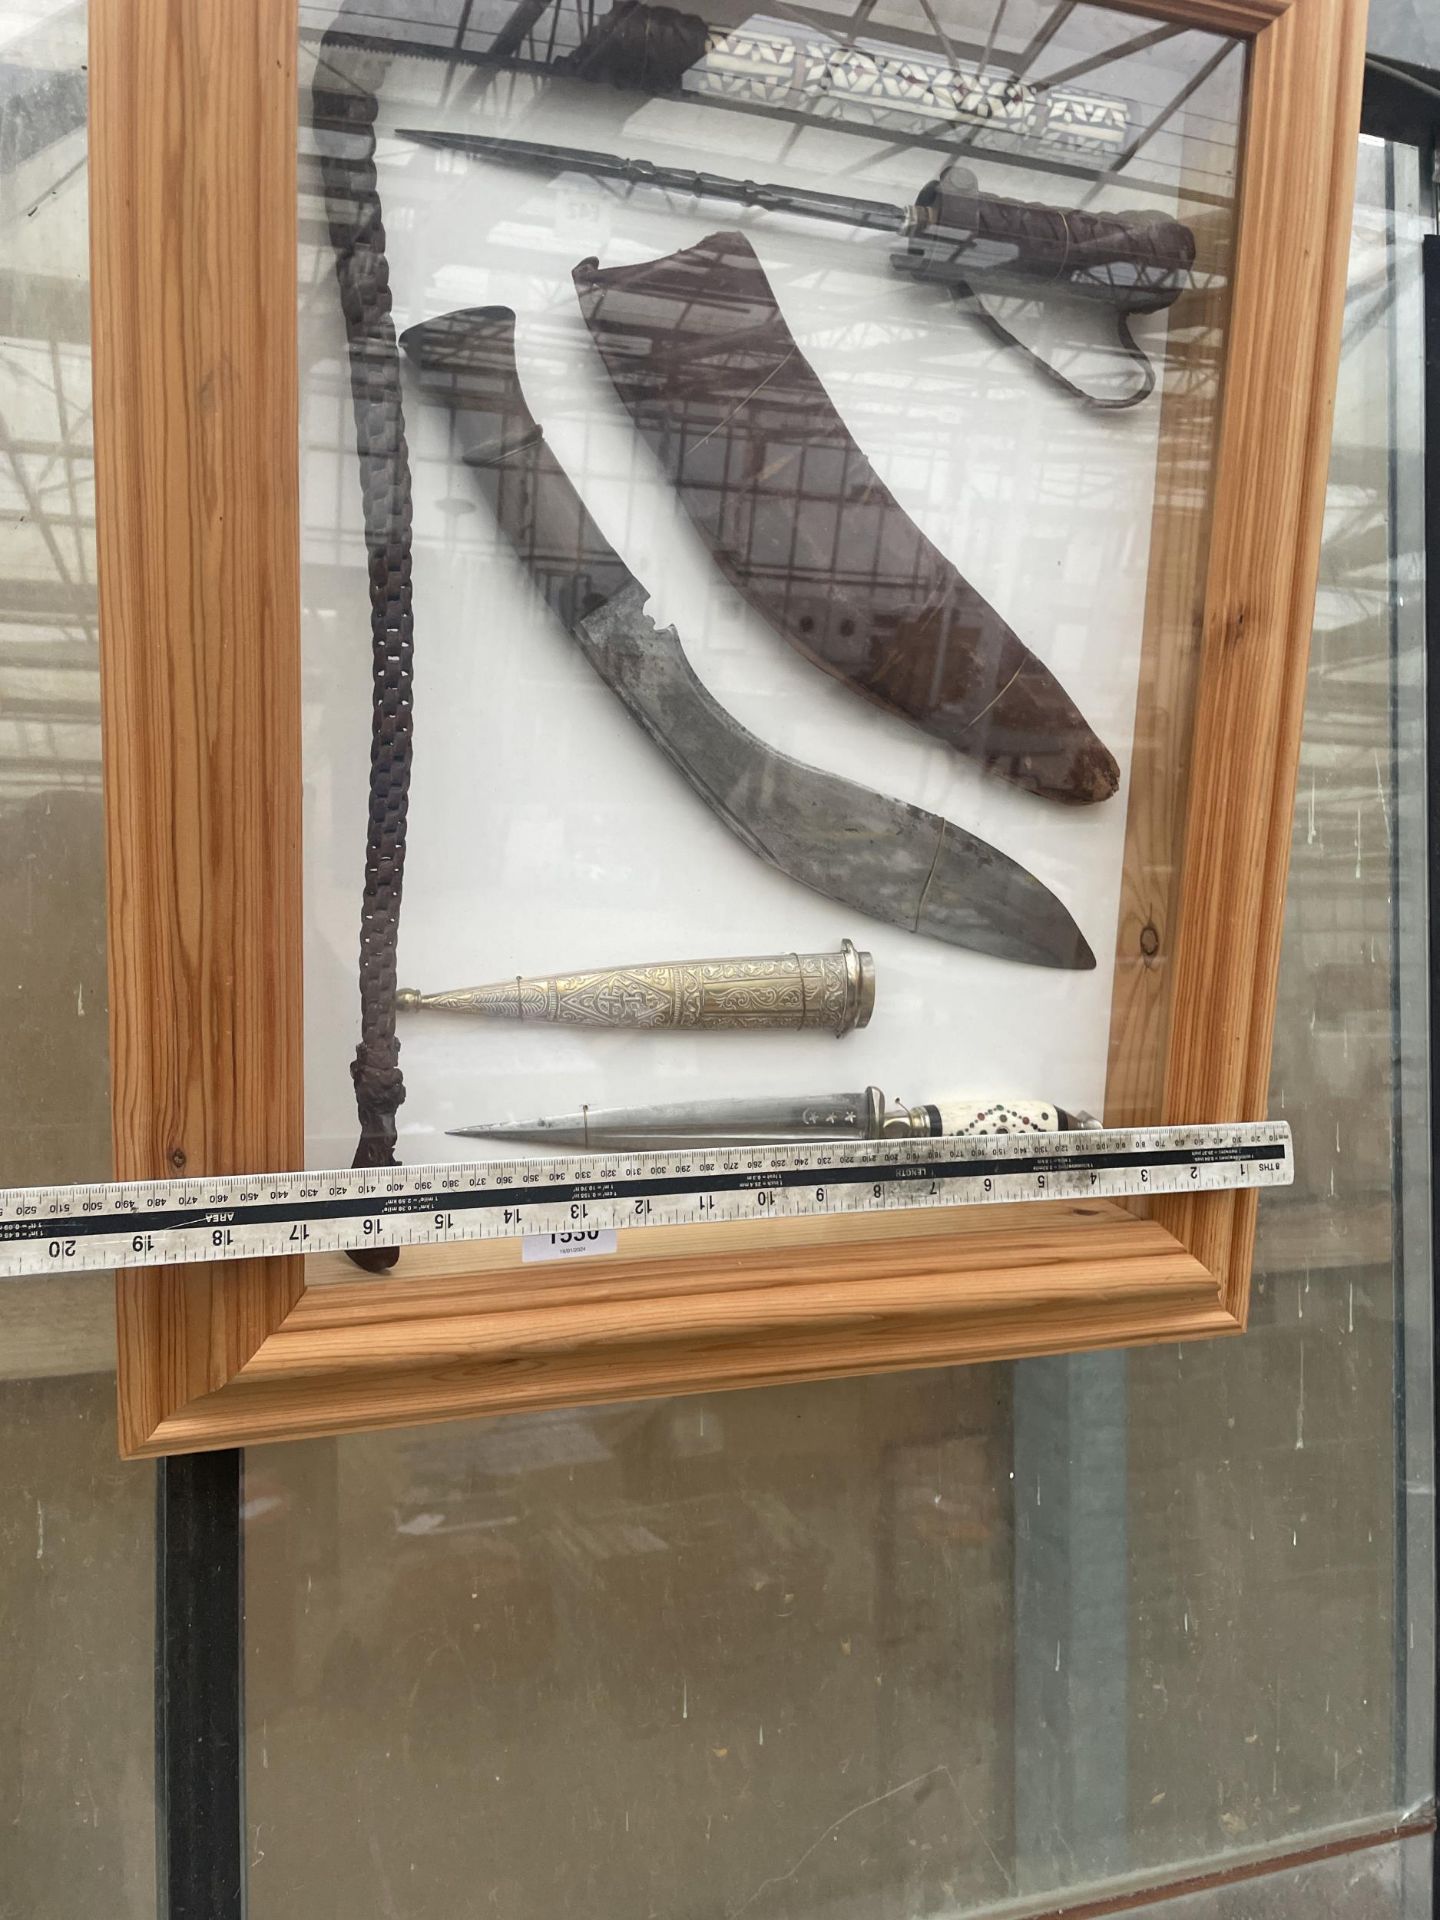 A PINE DISPLAY WALL HANGING FRAME WITH AN ASSORTMENT OF KNIVES - Image 2 of 3